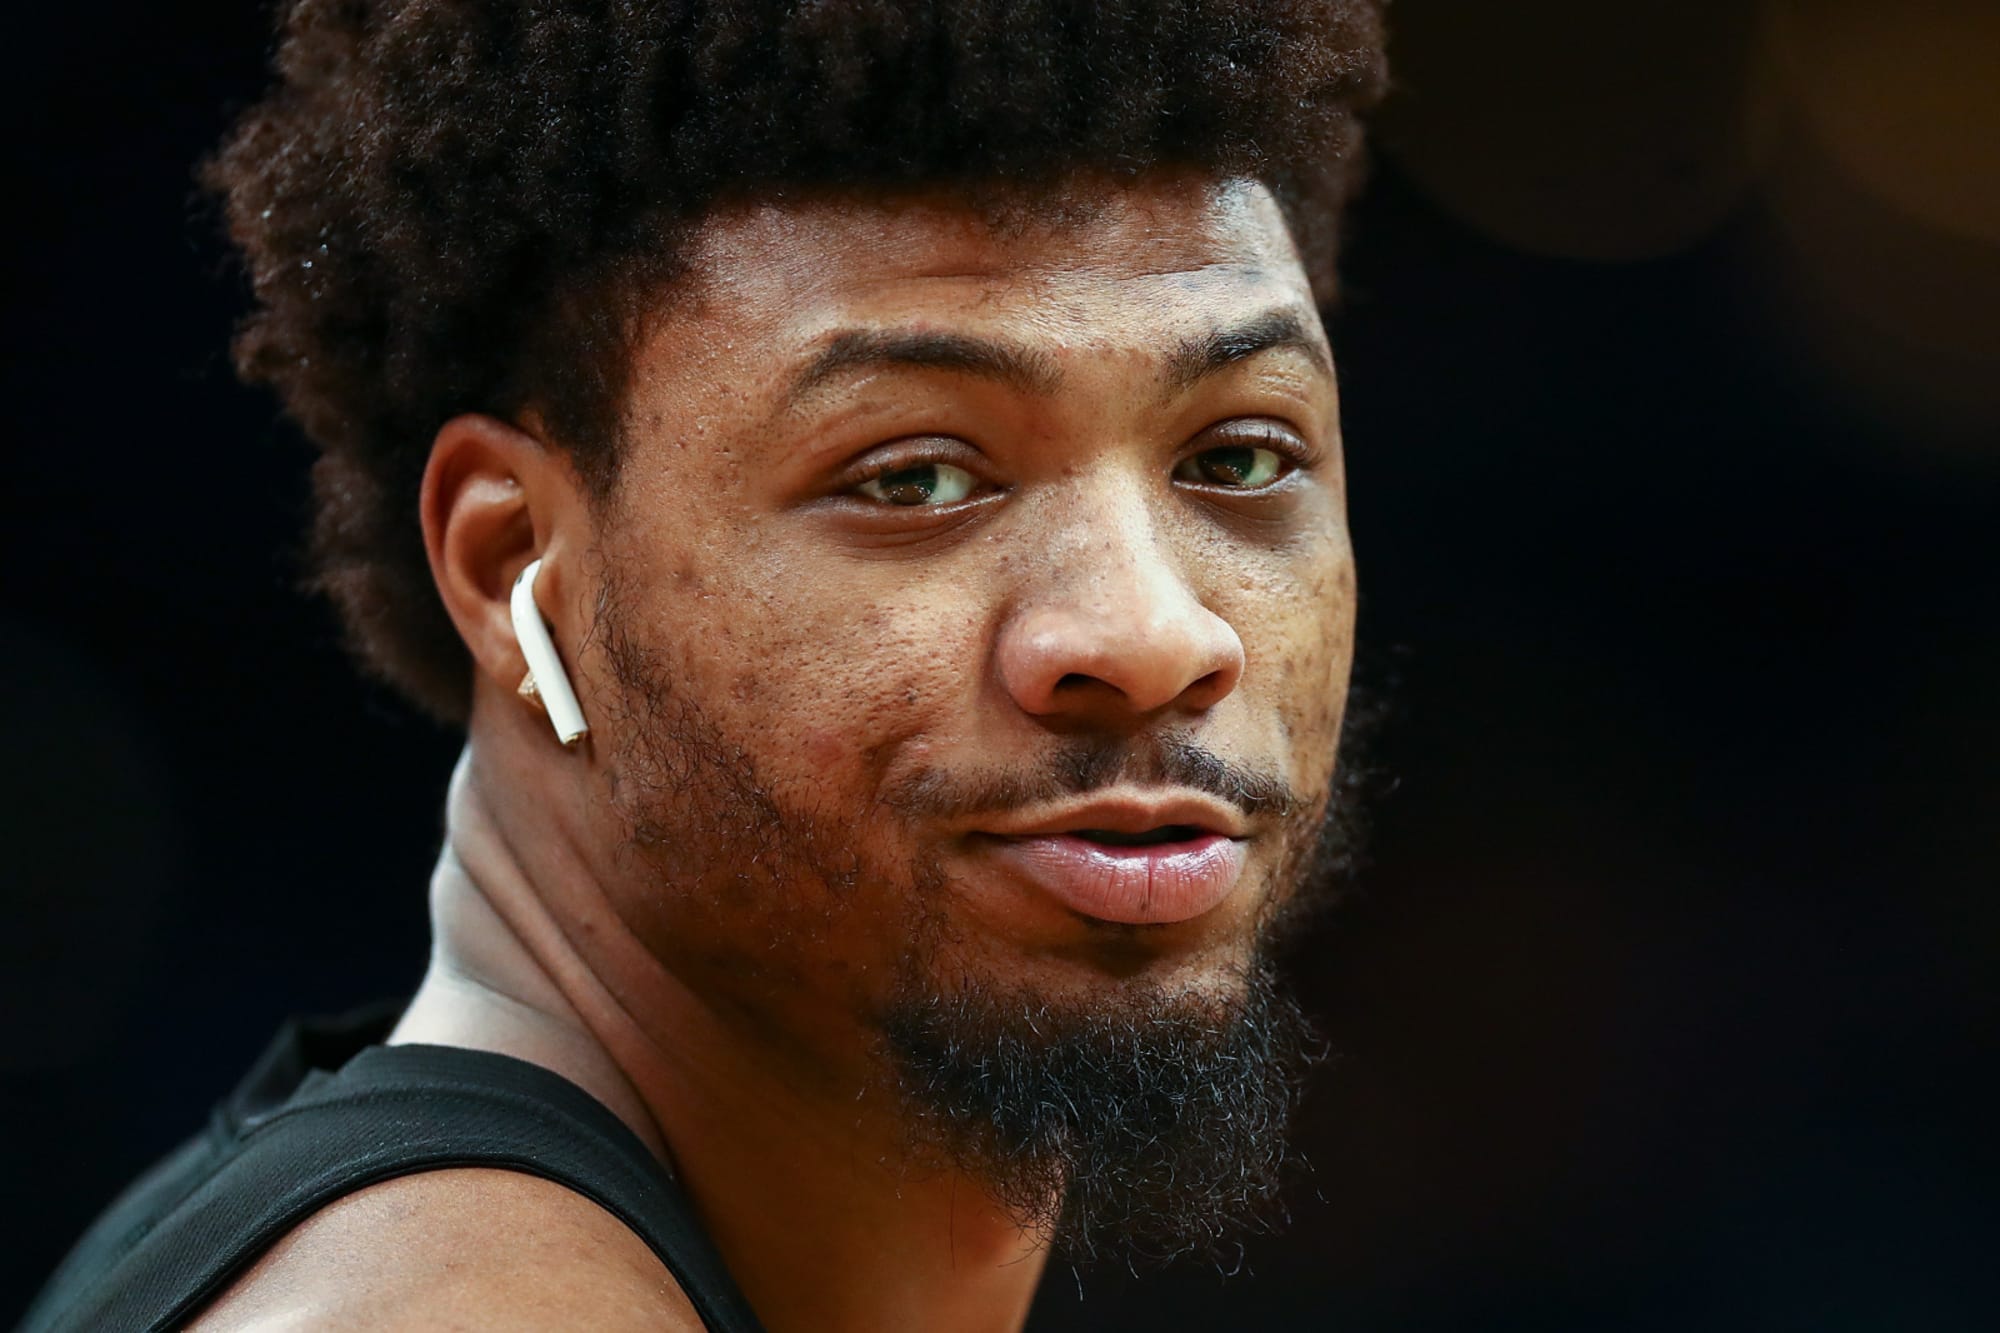 5. Marcus Smart's Blue Hair Causes Stir Among NBA Players - wide 3